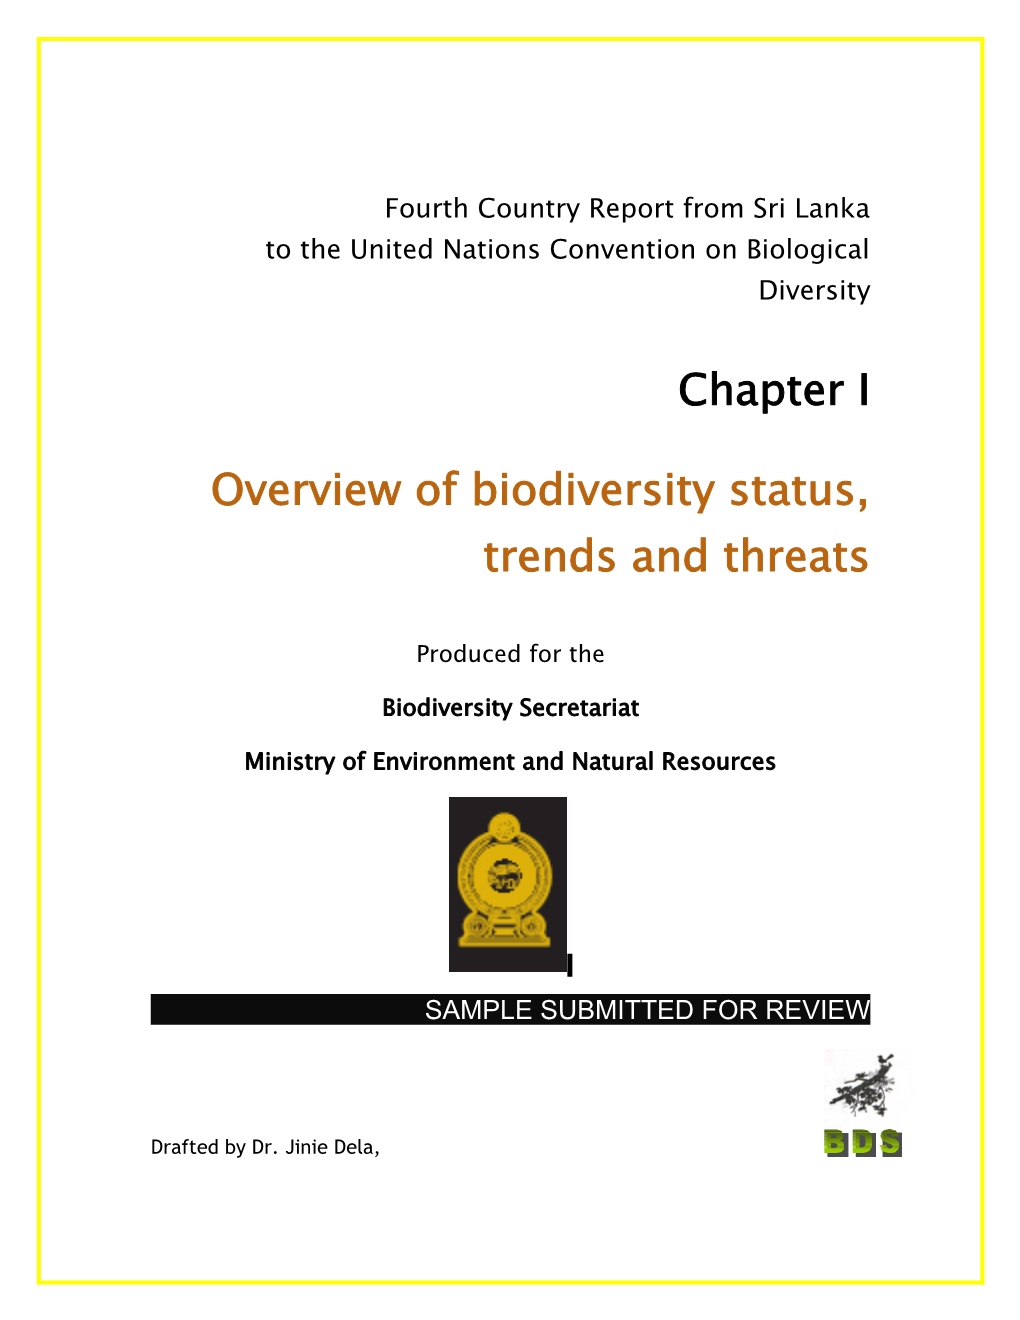 Overview of Biodiversity Status, Trends and Threats